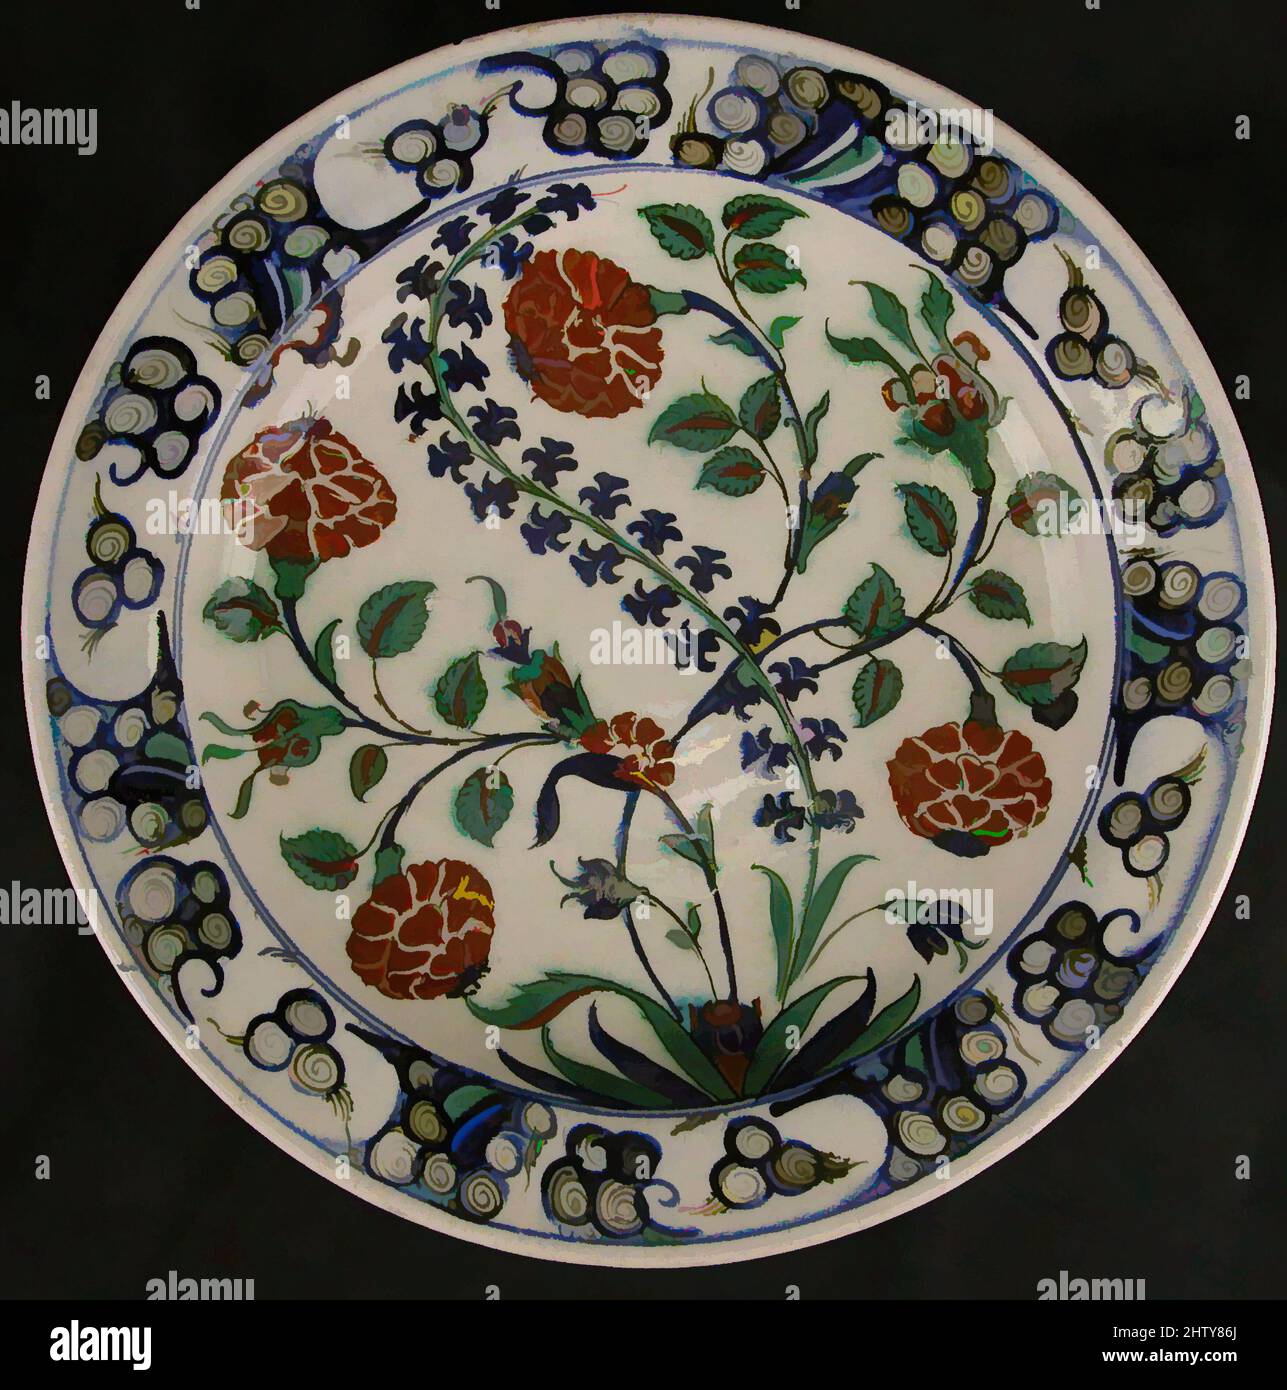 Art inspired by Dish, early 17th century, Made in Turkey, Iznik, Stonepaste; polychrome painted under a transparent glaze, H. 2 3/8 in. (6 cm), Ceramics, Classic works modernized by Artotop with a splash of modernity. Shapes, color and value, eye-catching visual impact on art. Emotions through freedom of artworks in a contemporary way. A timeless message pursuing a wildly creative new direction. Artists turning to the digital medium and creating the Artotop NFT Stock Photo